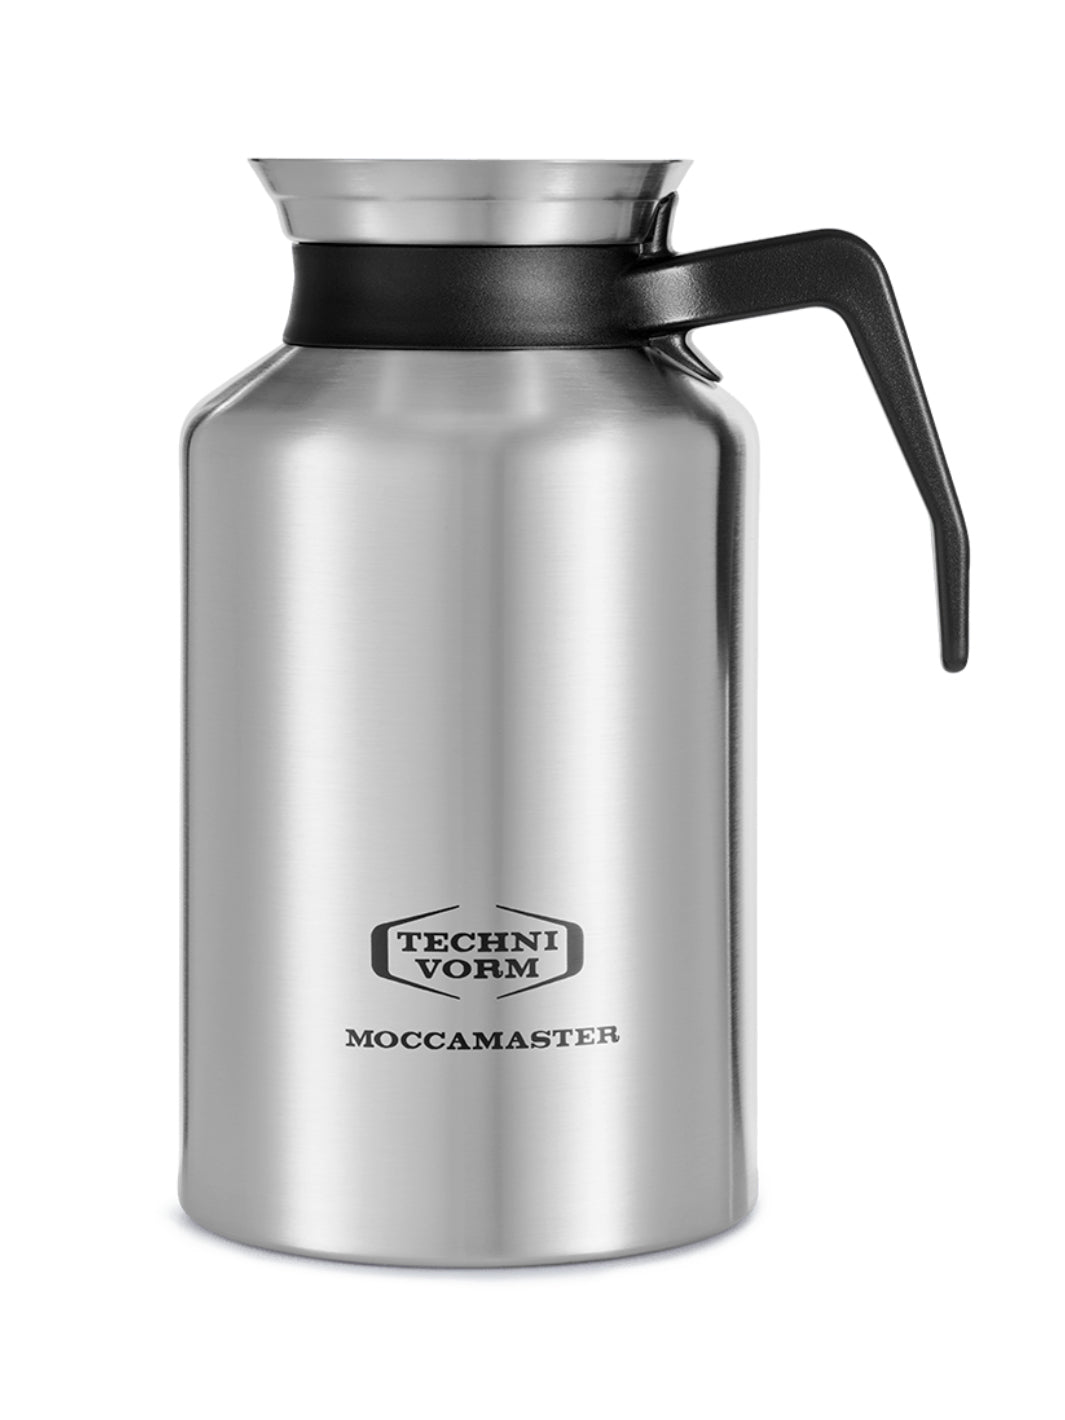 TECHNIVORM Moccamaster Replacement Thermal Carafe (1800ml/60oz) (CDT Grand)